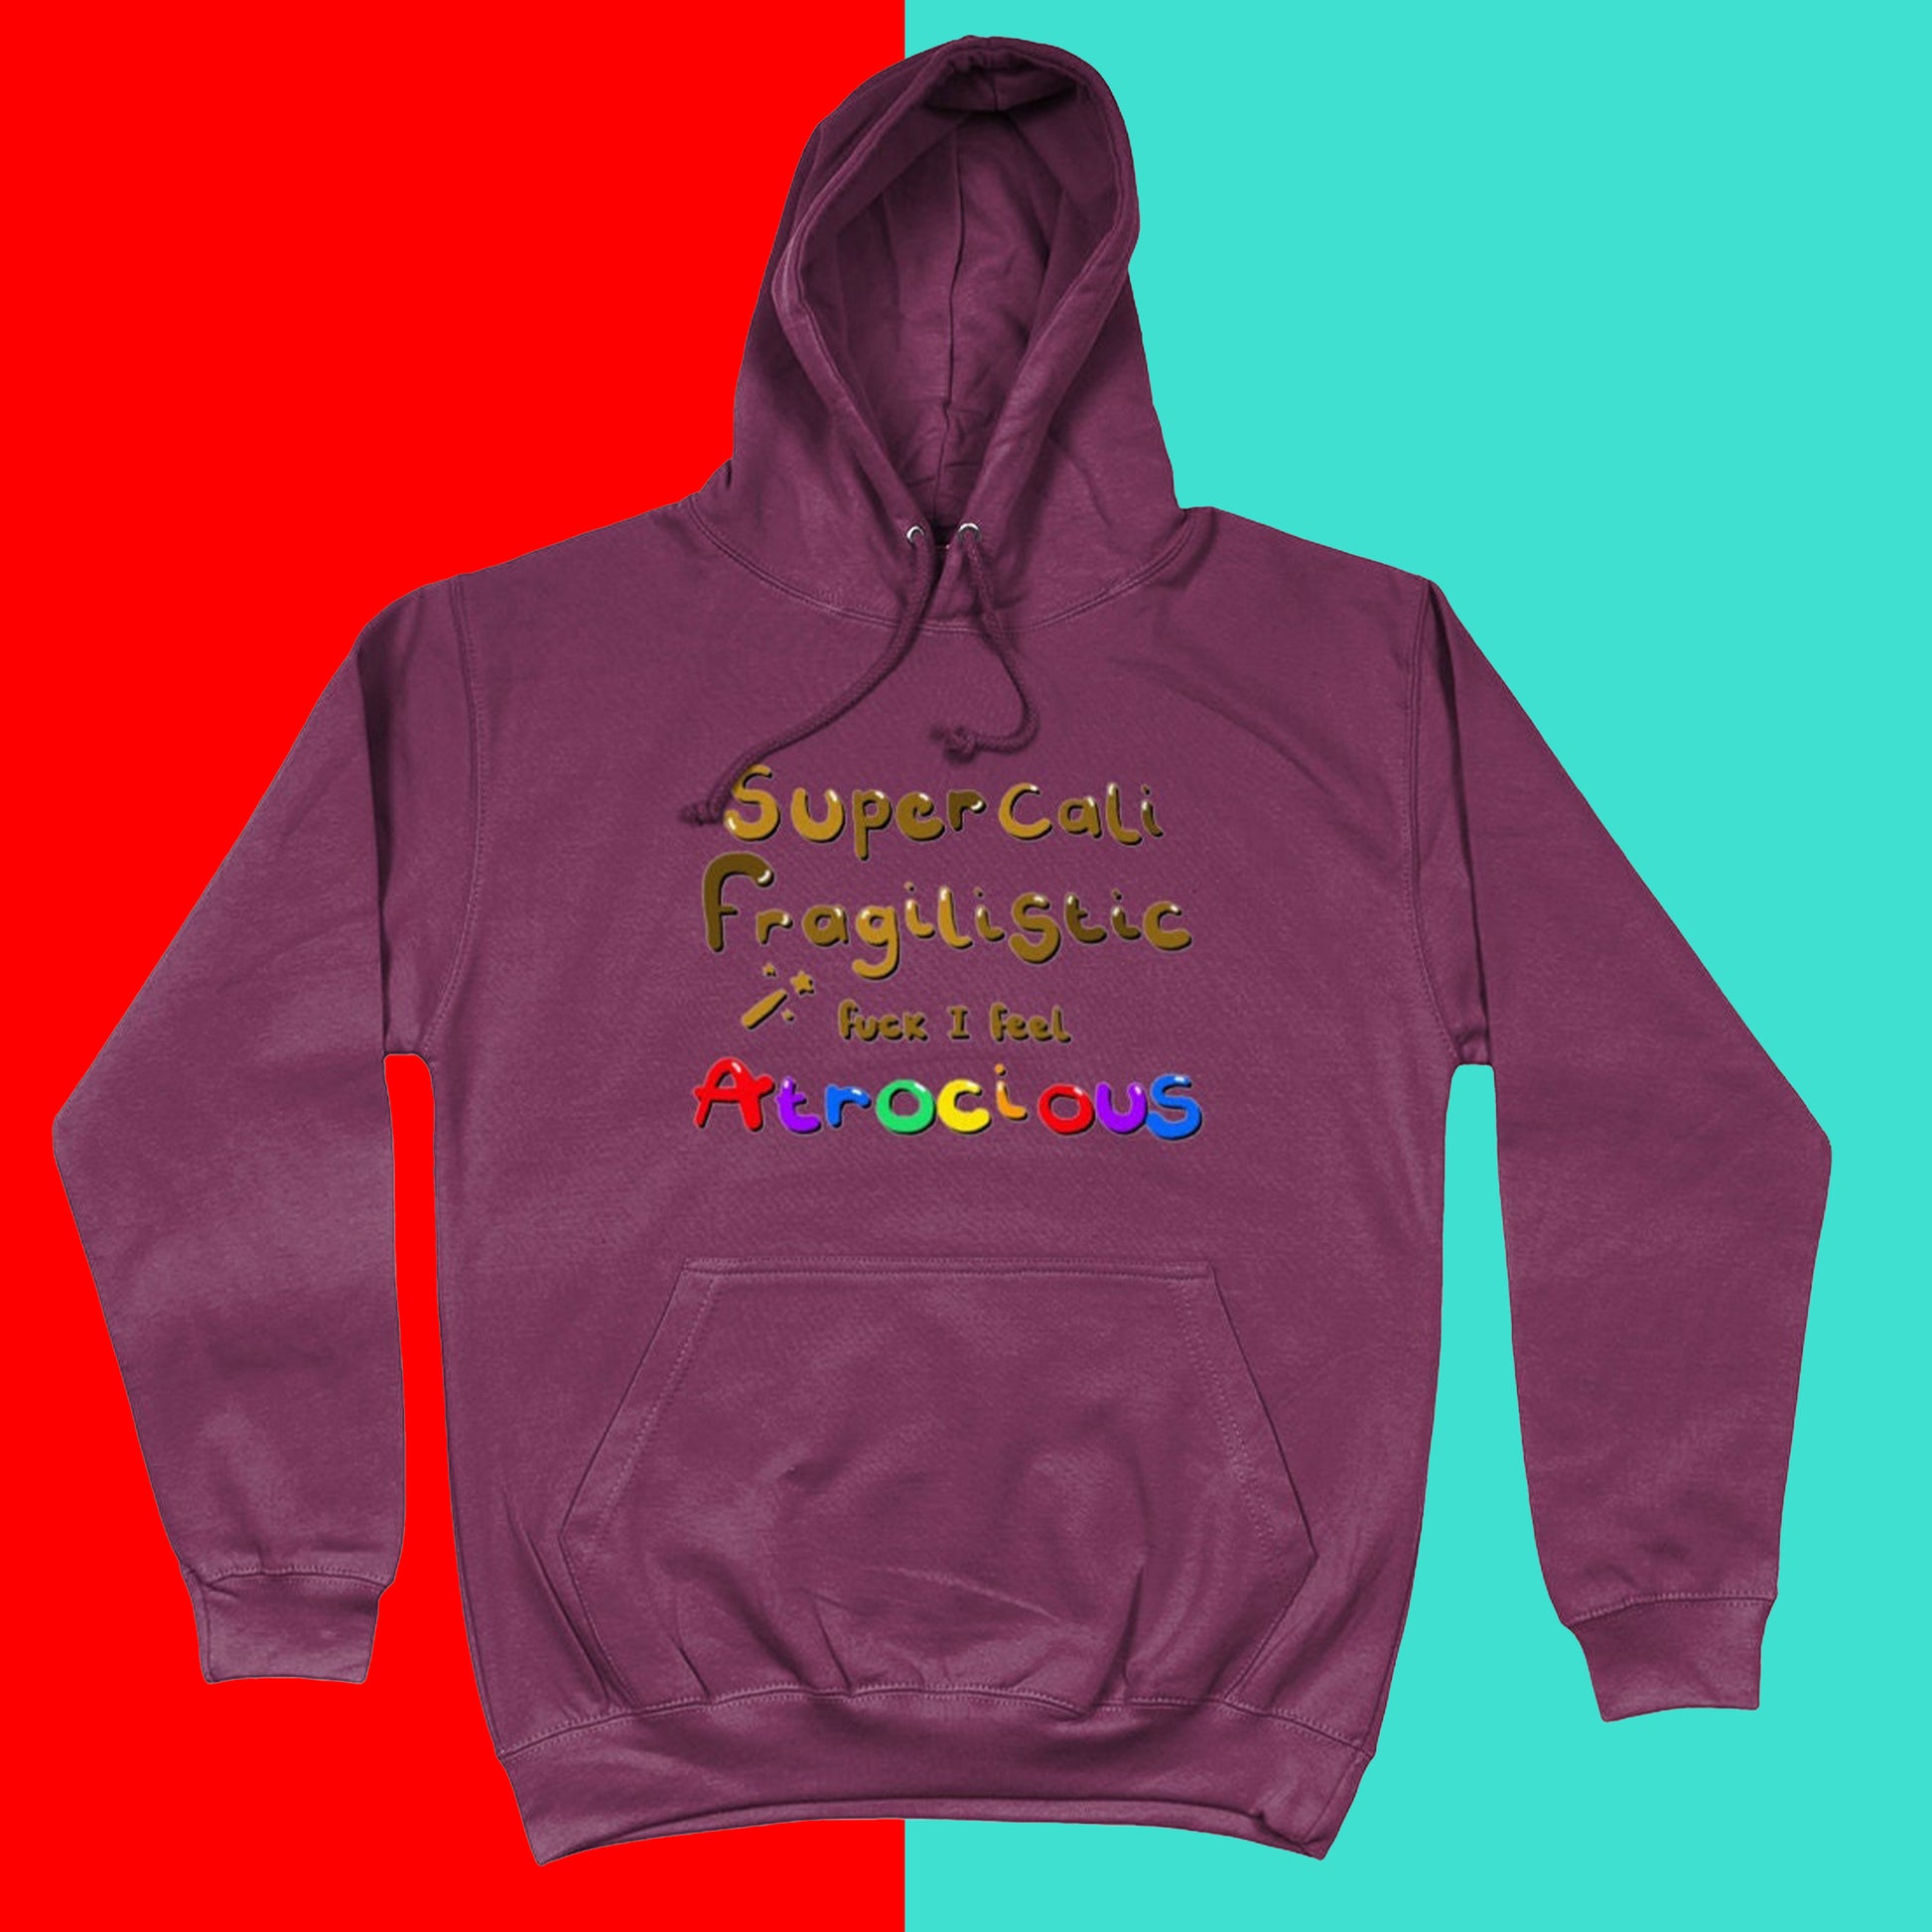 I Feel Atrocious Hoodie on a blue and red background. The plum coloured hoodie has gold text on it that says 'supercali fragilistic f*** I feel' and then 'atrocious' in rainbow coloured text. Design to raise awareness for chronic illness 